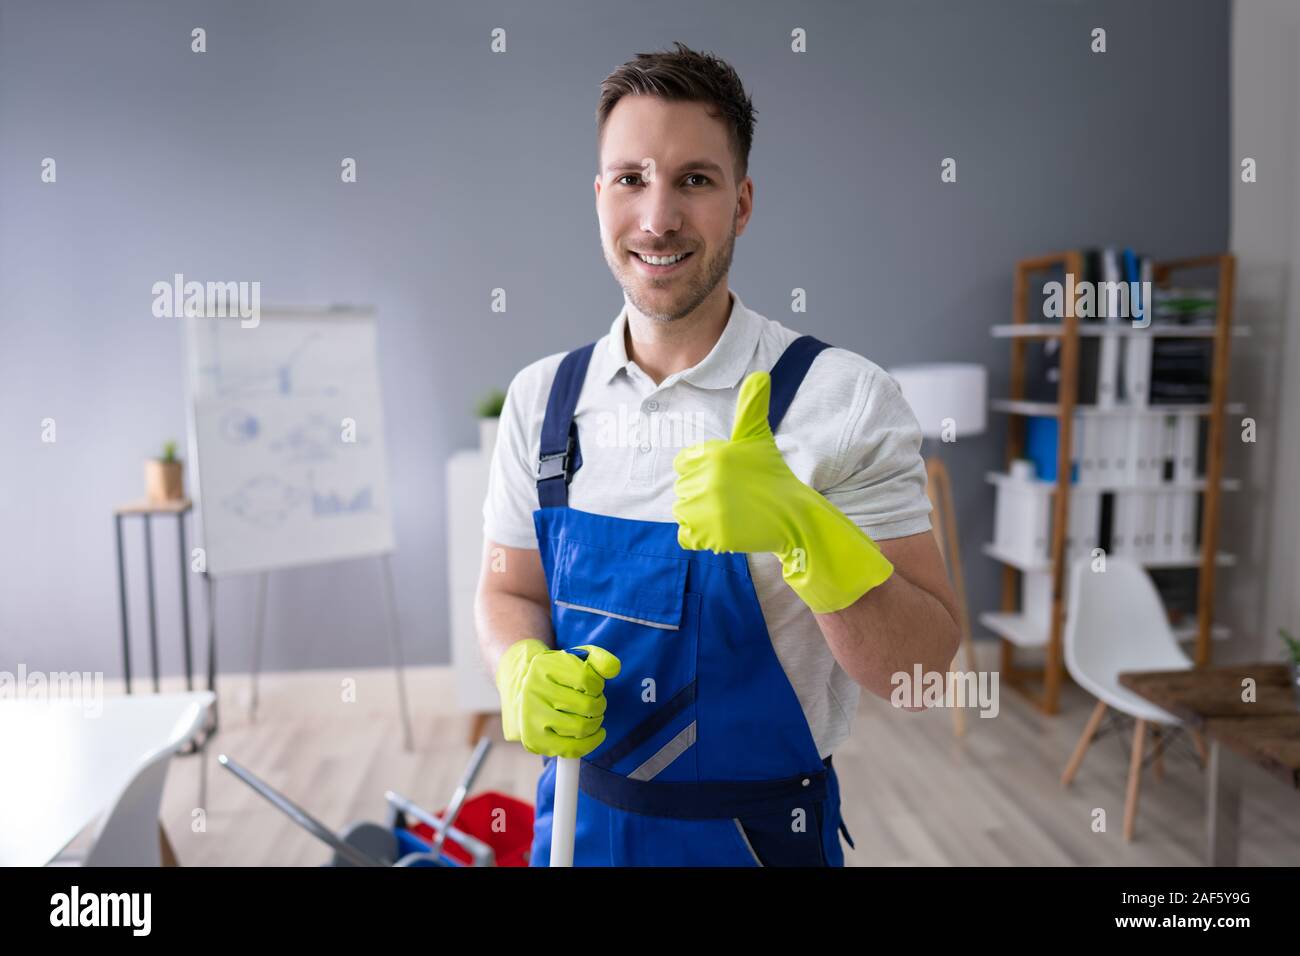 Full Length Portrait Of Happy Male Worker With Broom Cleaning Office Stock Photo